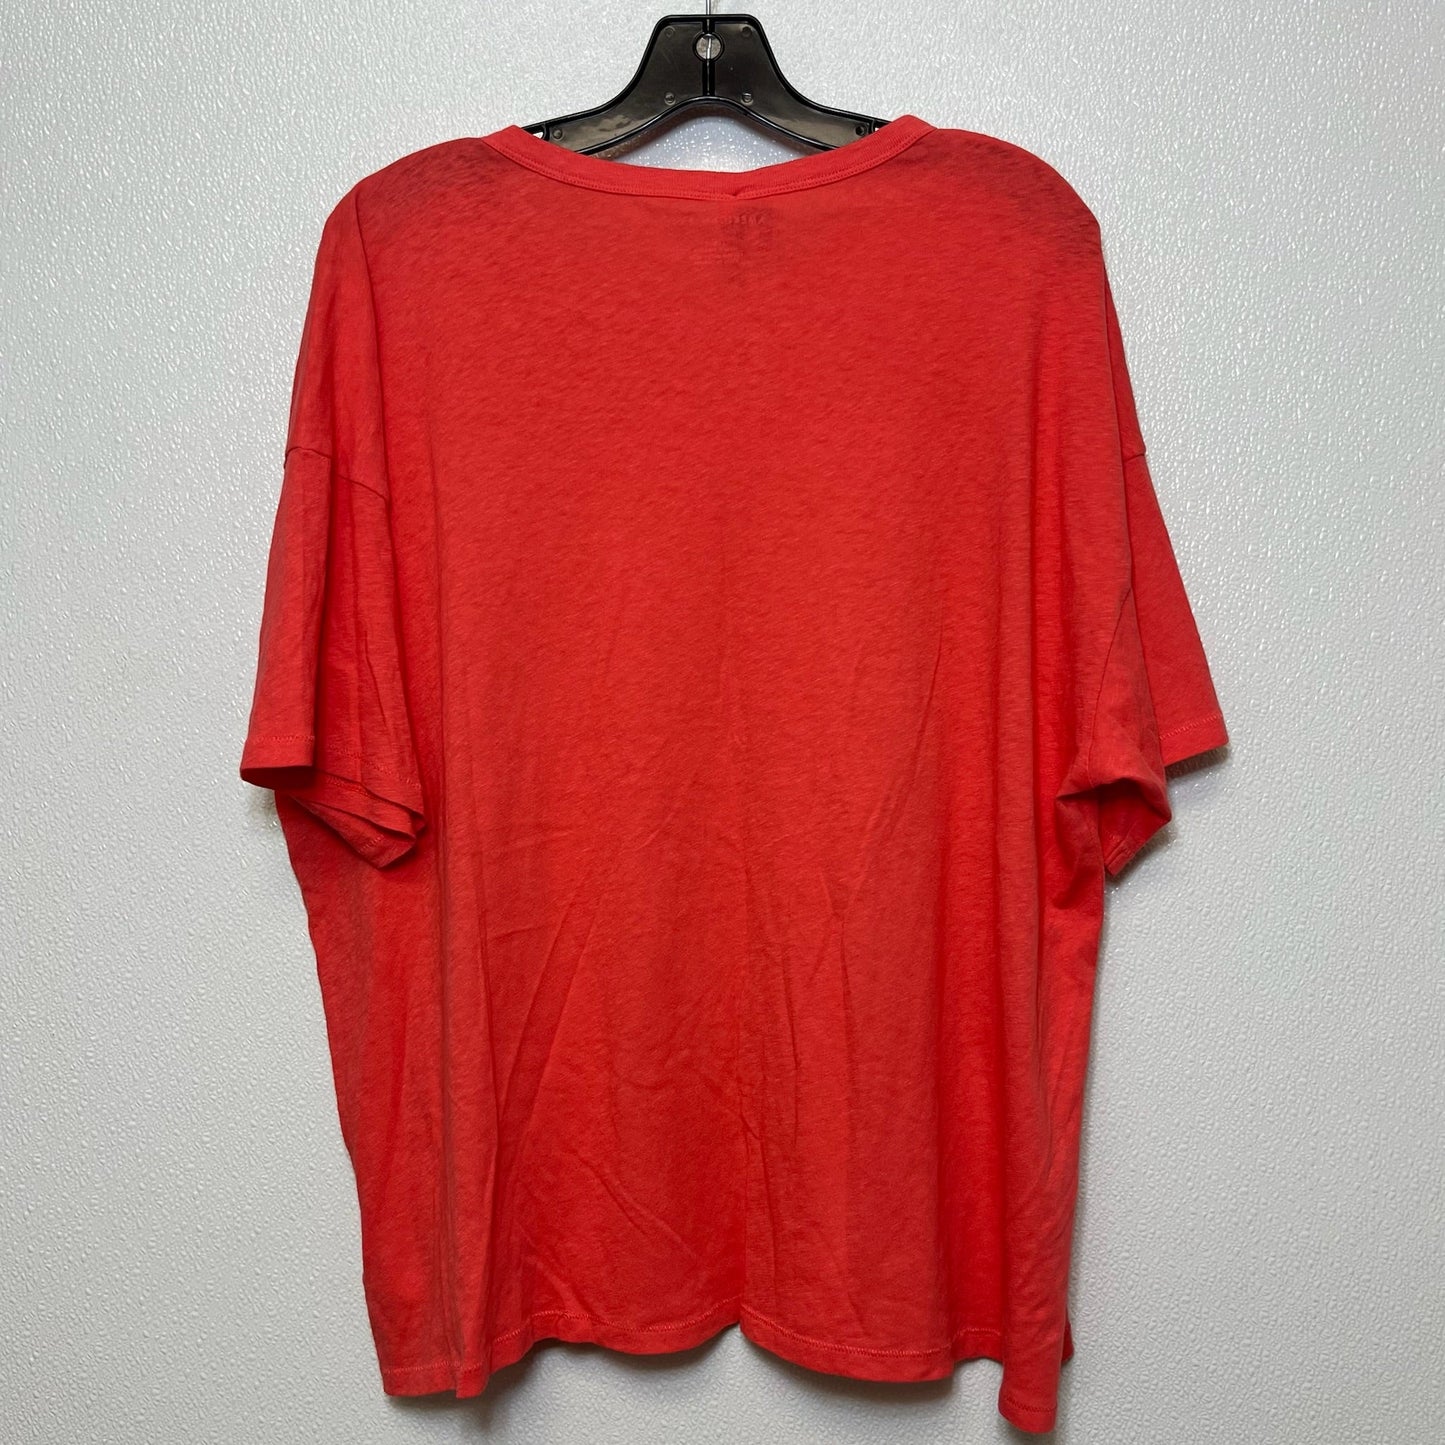 Coral Top Sleeveless Basic American Eagle, Size L